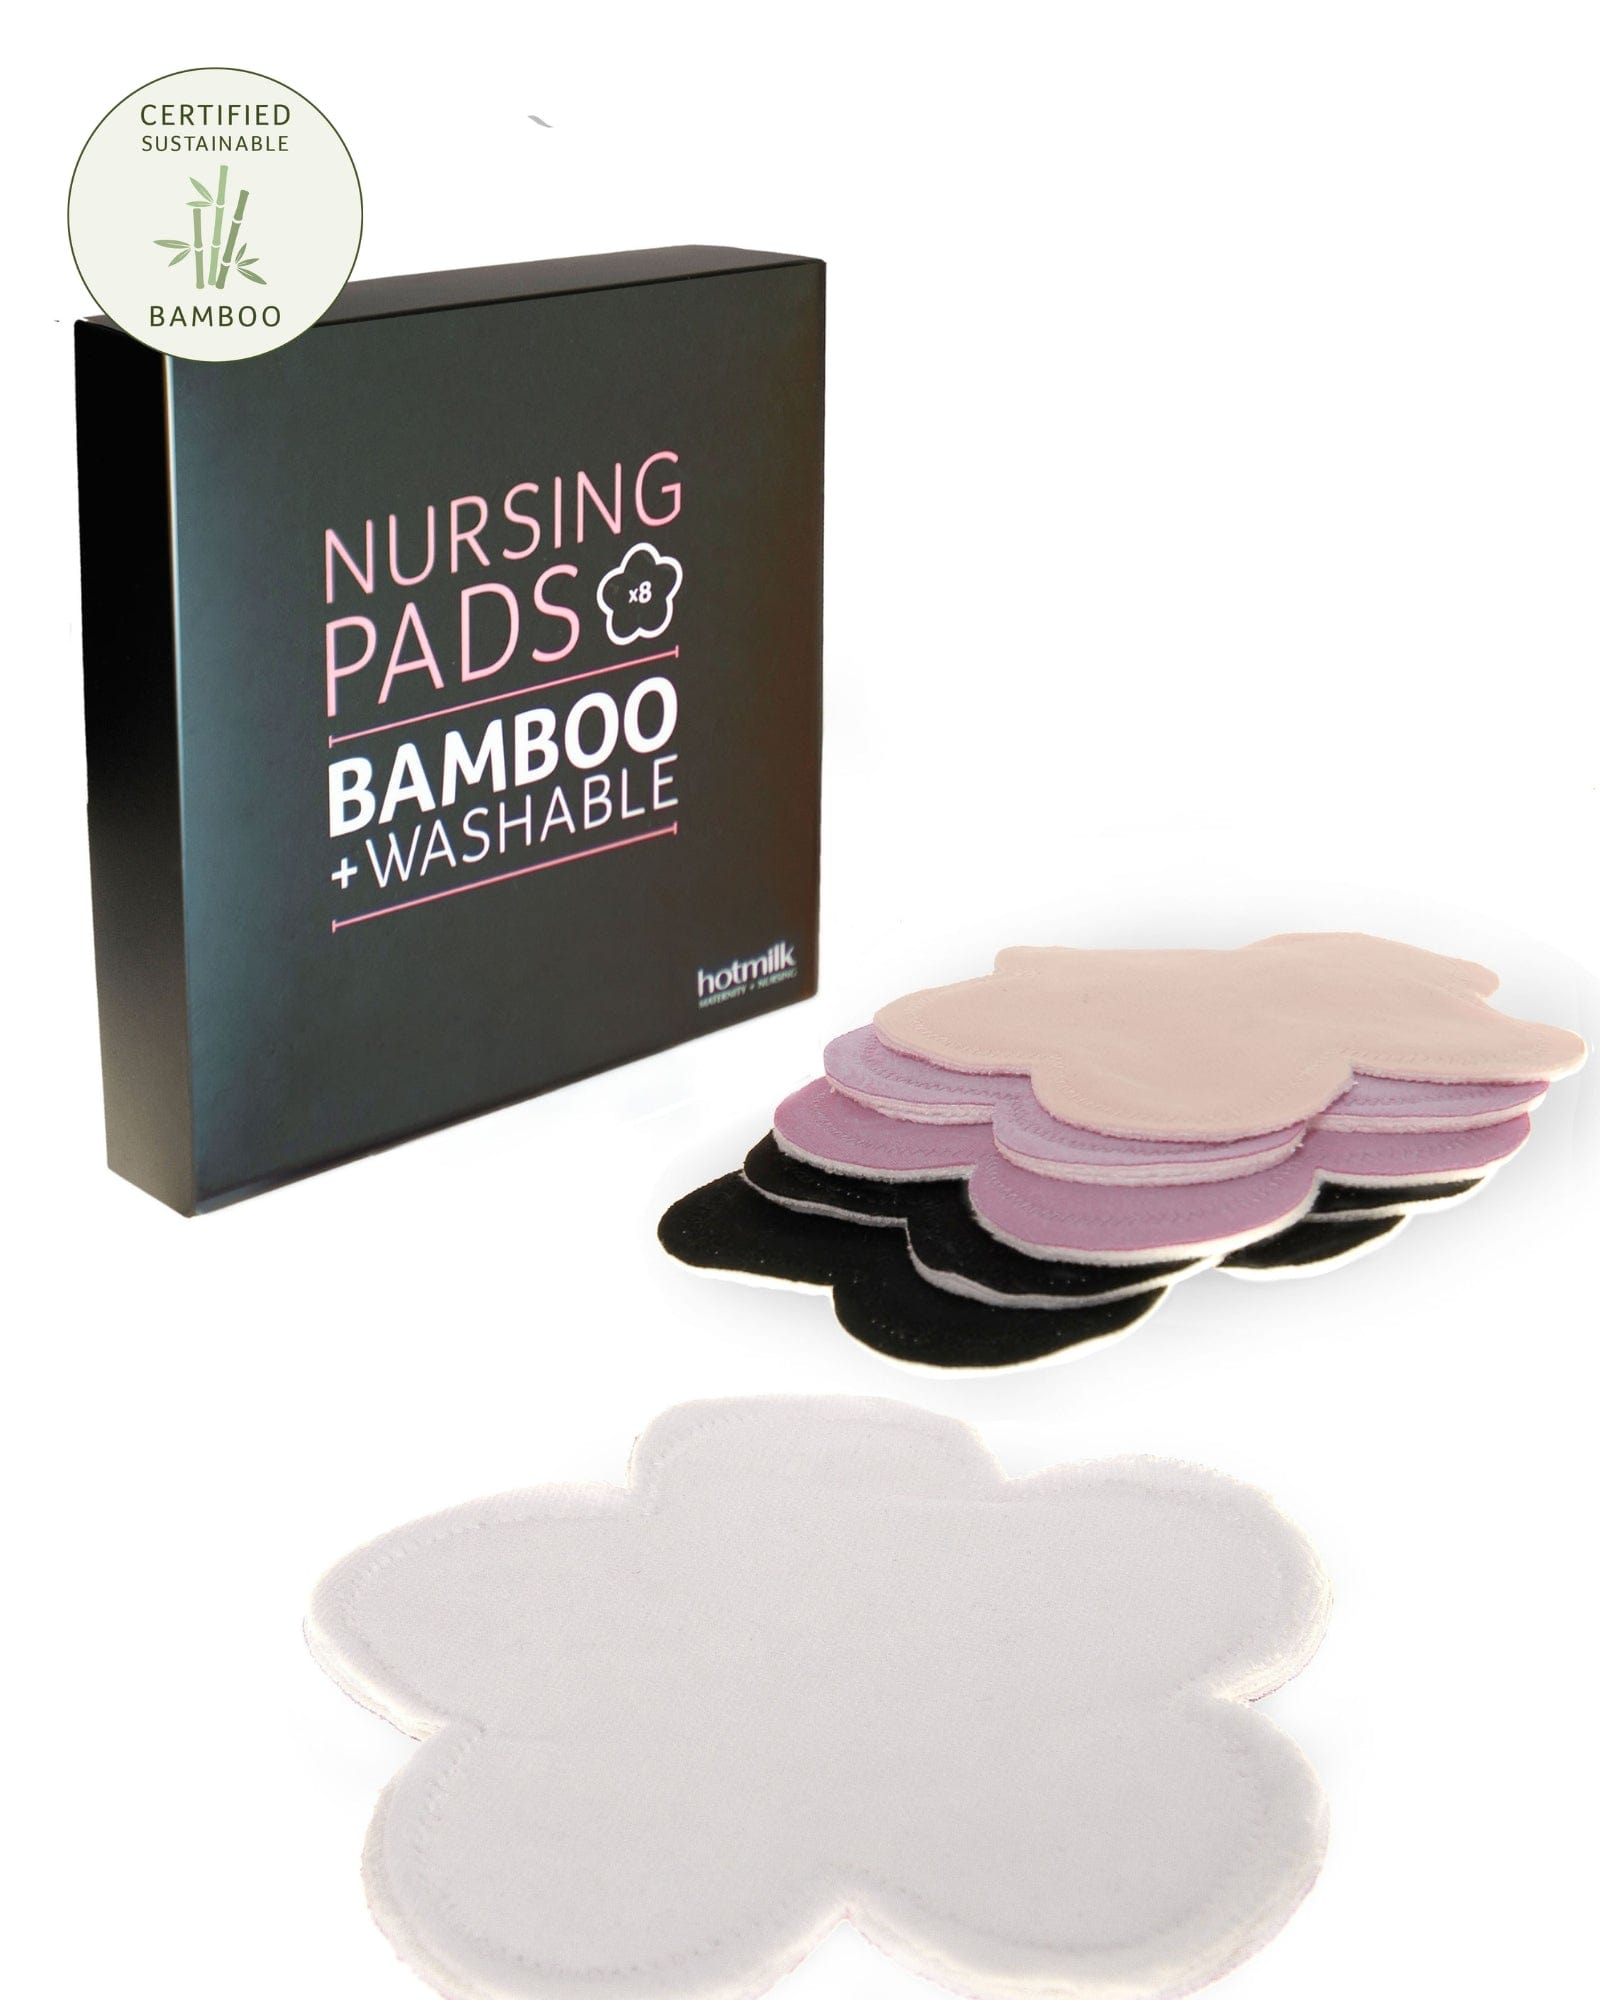 8Pairs Washable Bamboo Nursing Pads Breast Milk Pad Nipple Breastfeeding  Pads Reusable Maternity Mat for Baby Feed Cotton Pads 